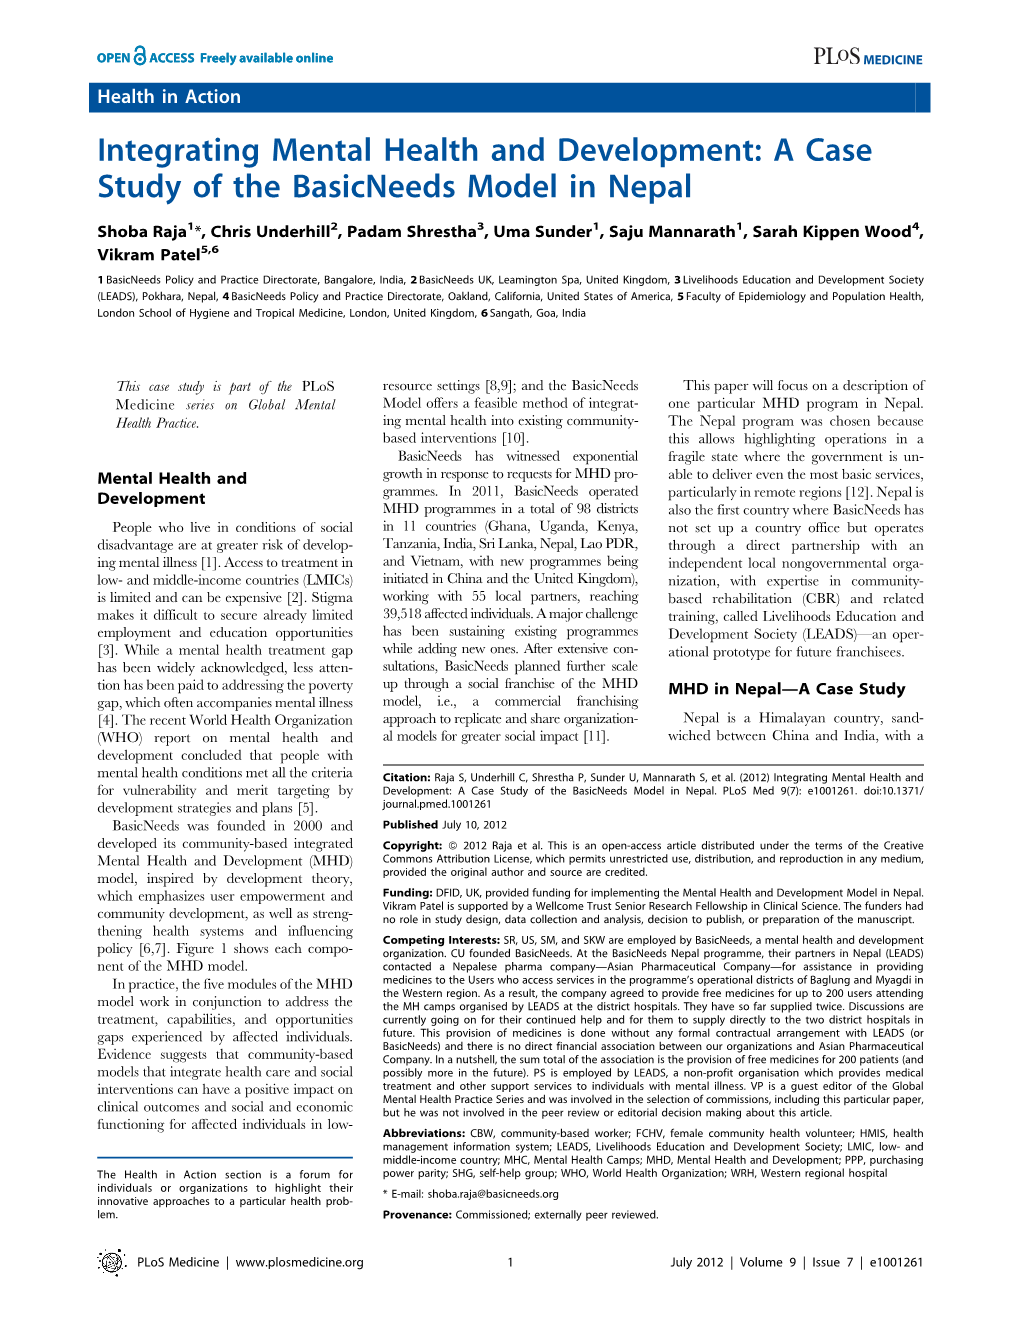 Integrating Mental Health and Development: a Case Study of the Basicneeds Model in Nepal